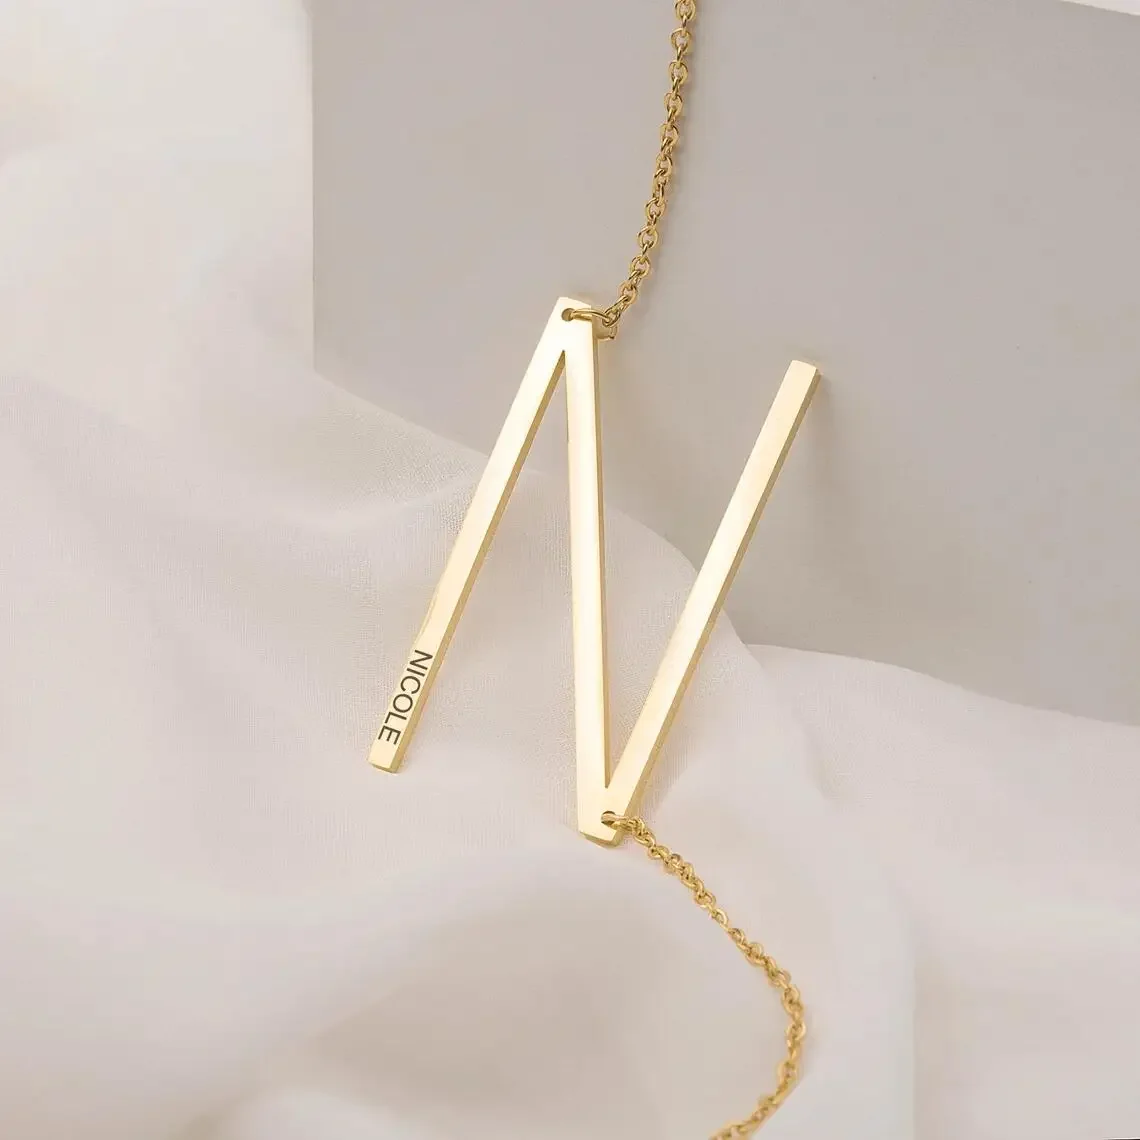 Stainless Steel 26 English Letters Big Letter Necklace By Sideways Initial Necklace Customized Necklace Bridesmaid Gifts